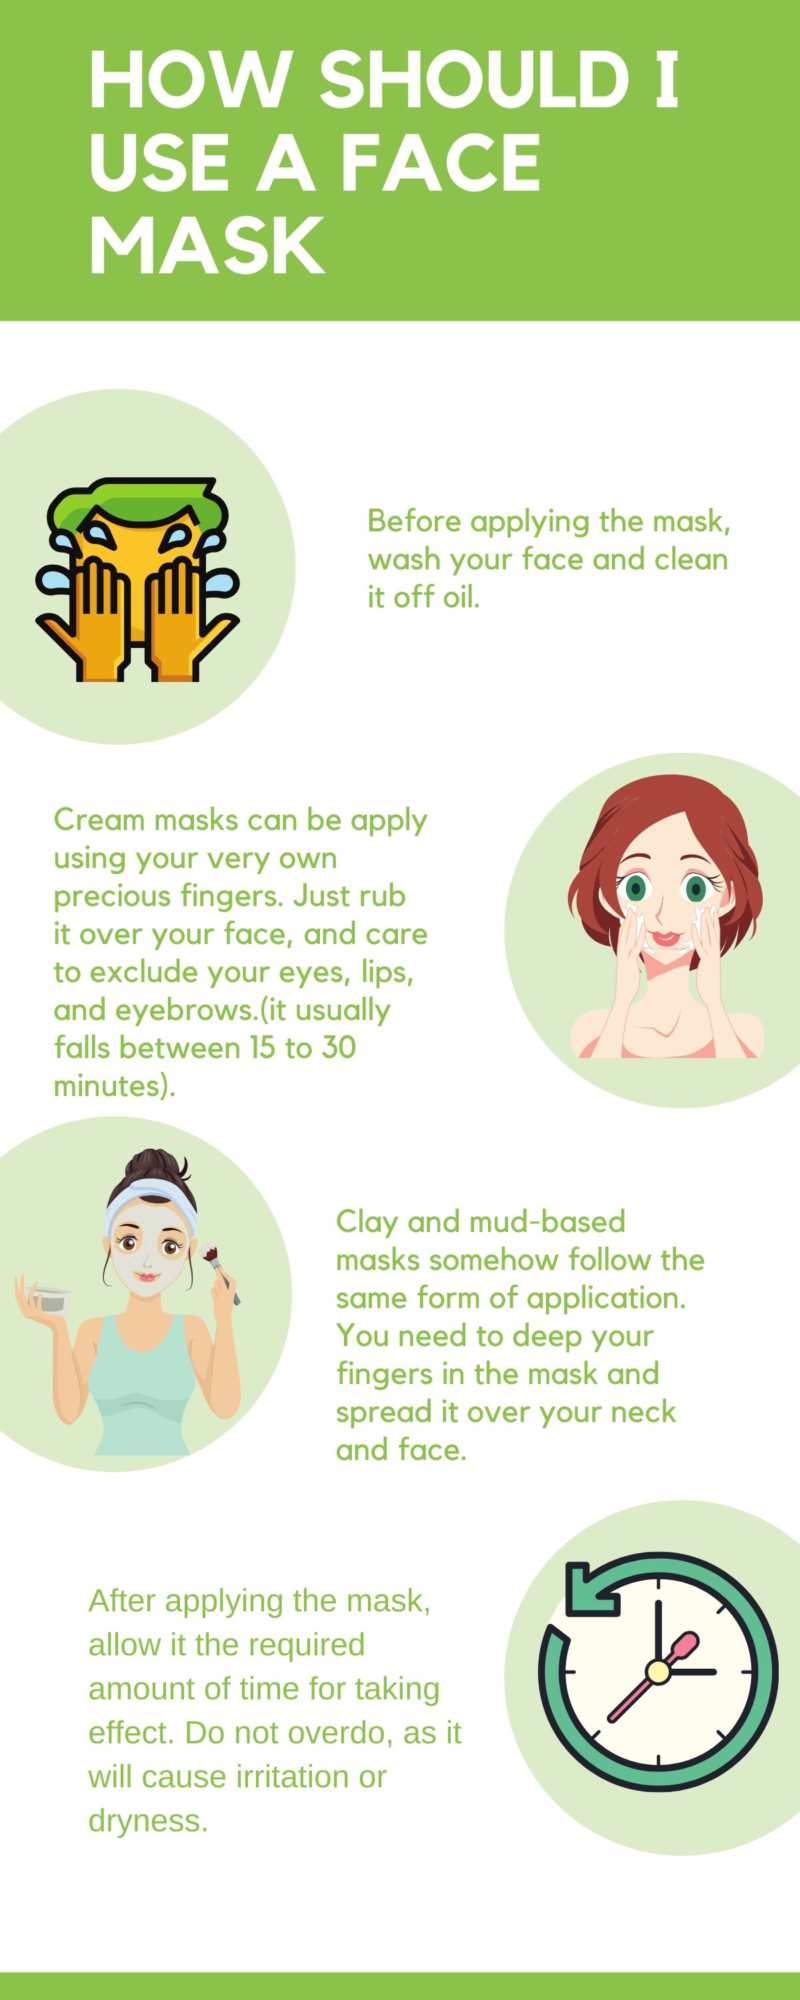 How should I use a face mask